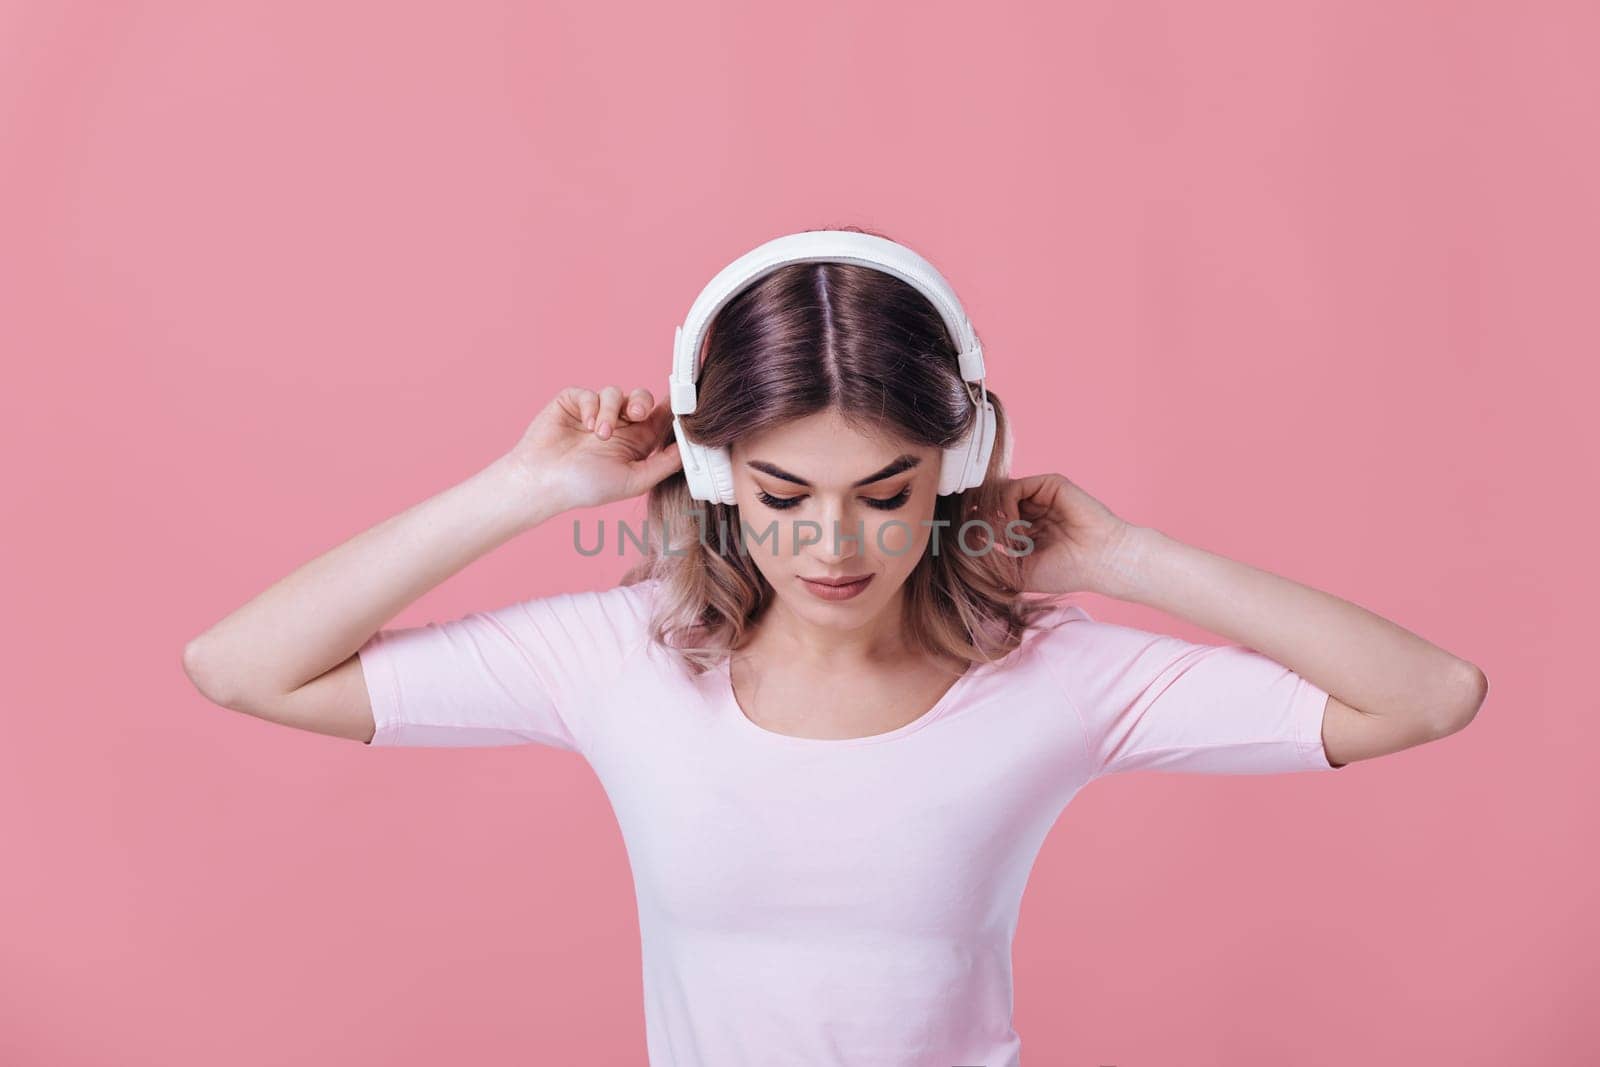 beautiful blonde woman in pink t-shirt and white headphones enjoying listens to music on pink background